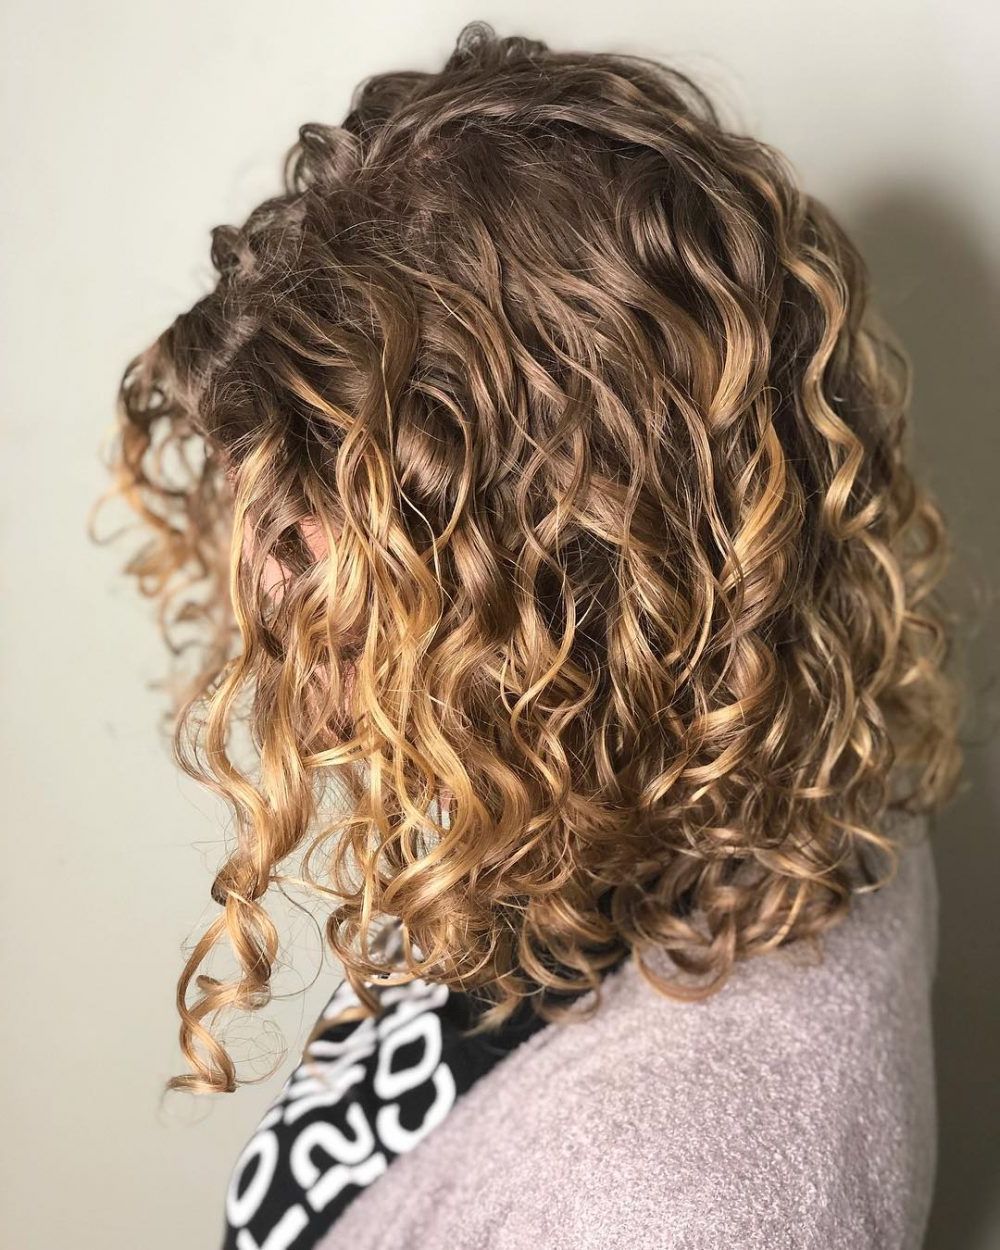 30 Gorgeous Medium Length Curly Hairstyles For Women In 2019 Within 2018 Curly Medium Hairstyles With Bangs (View 3 of 20)